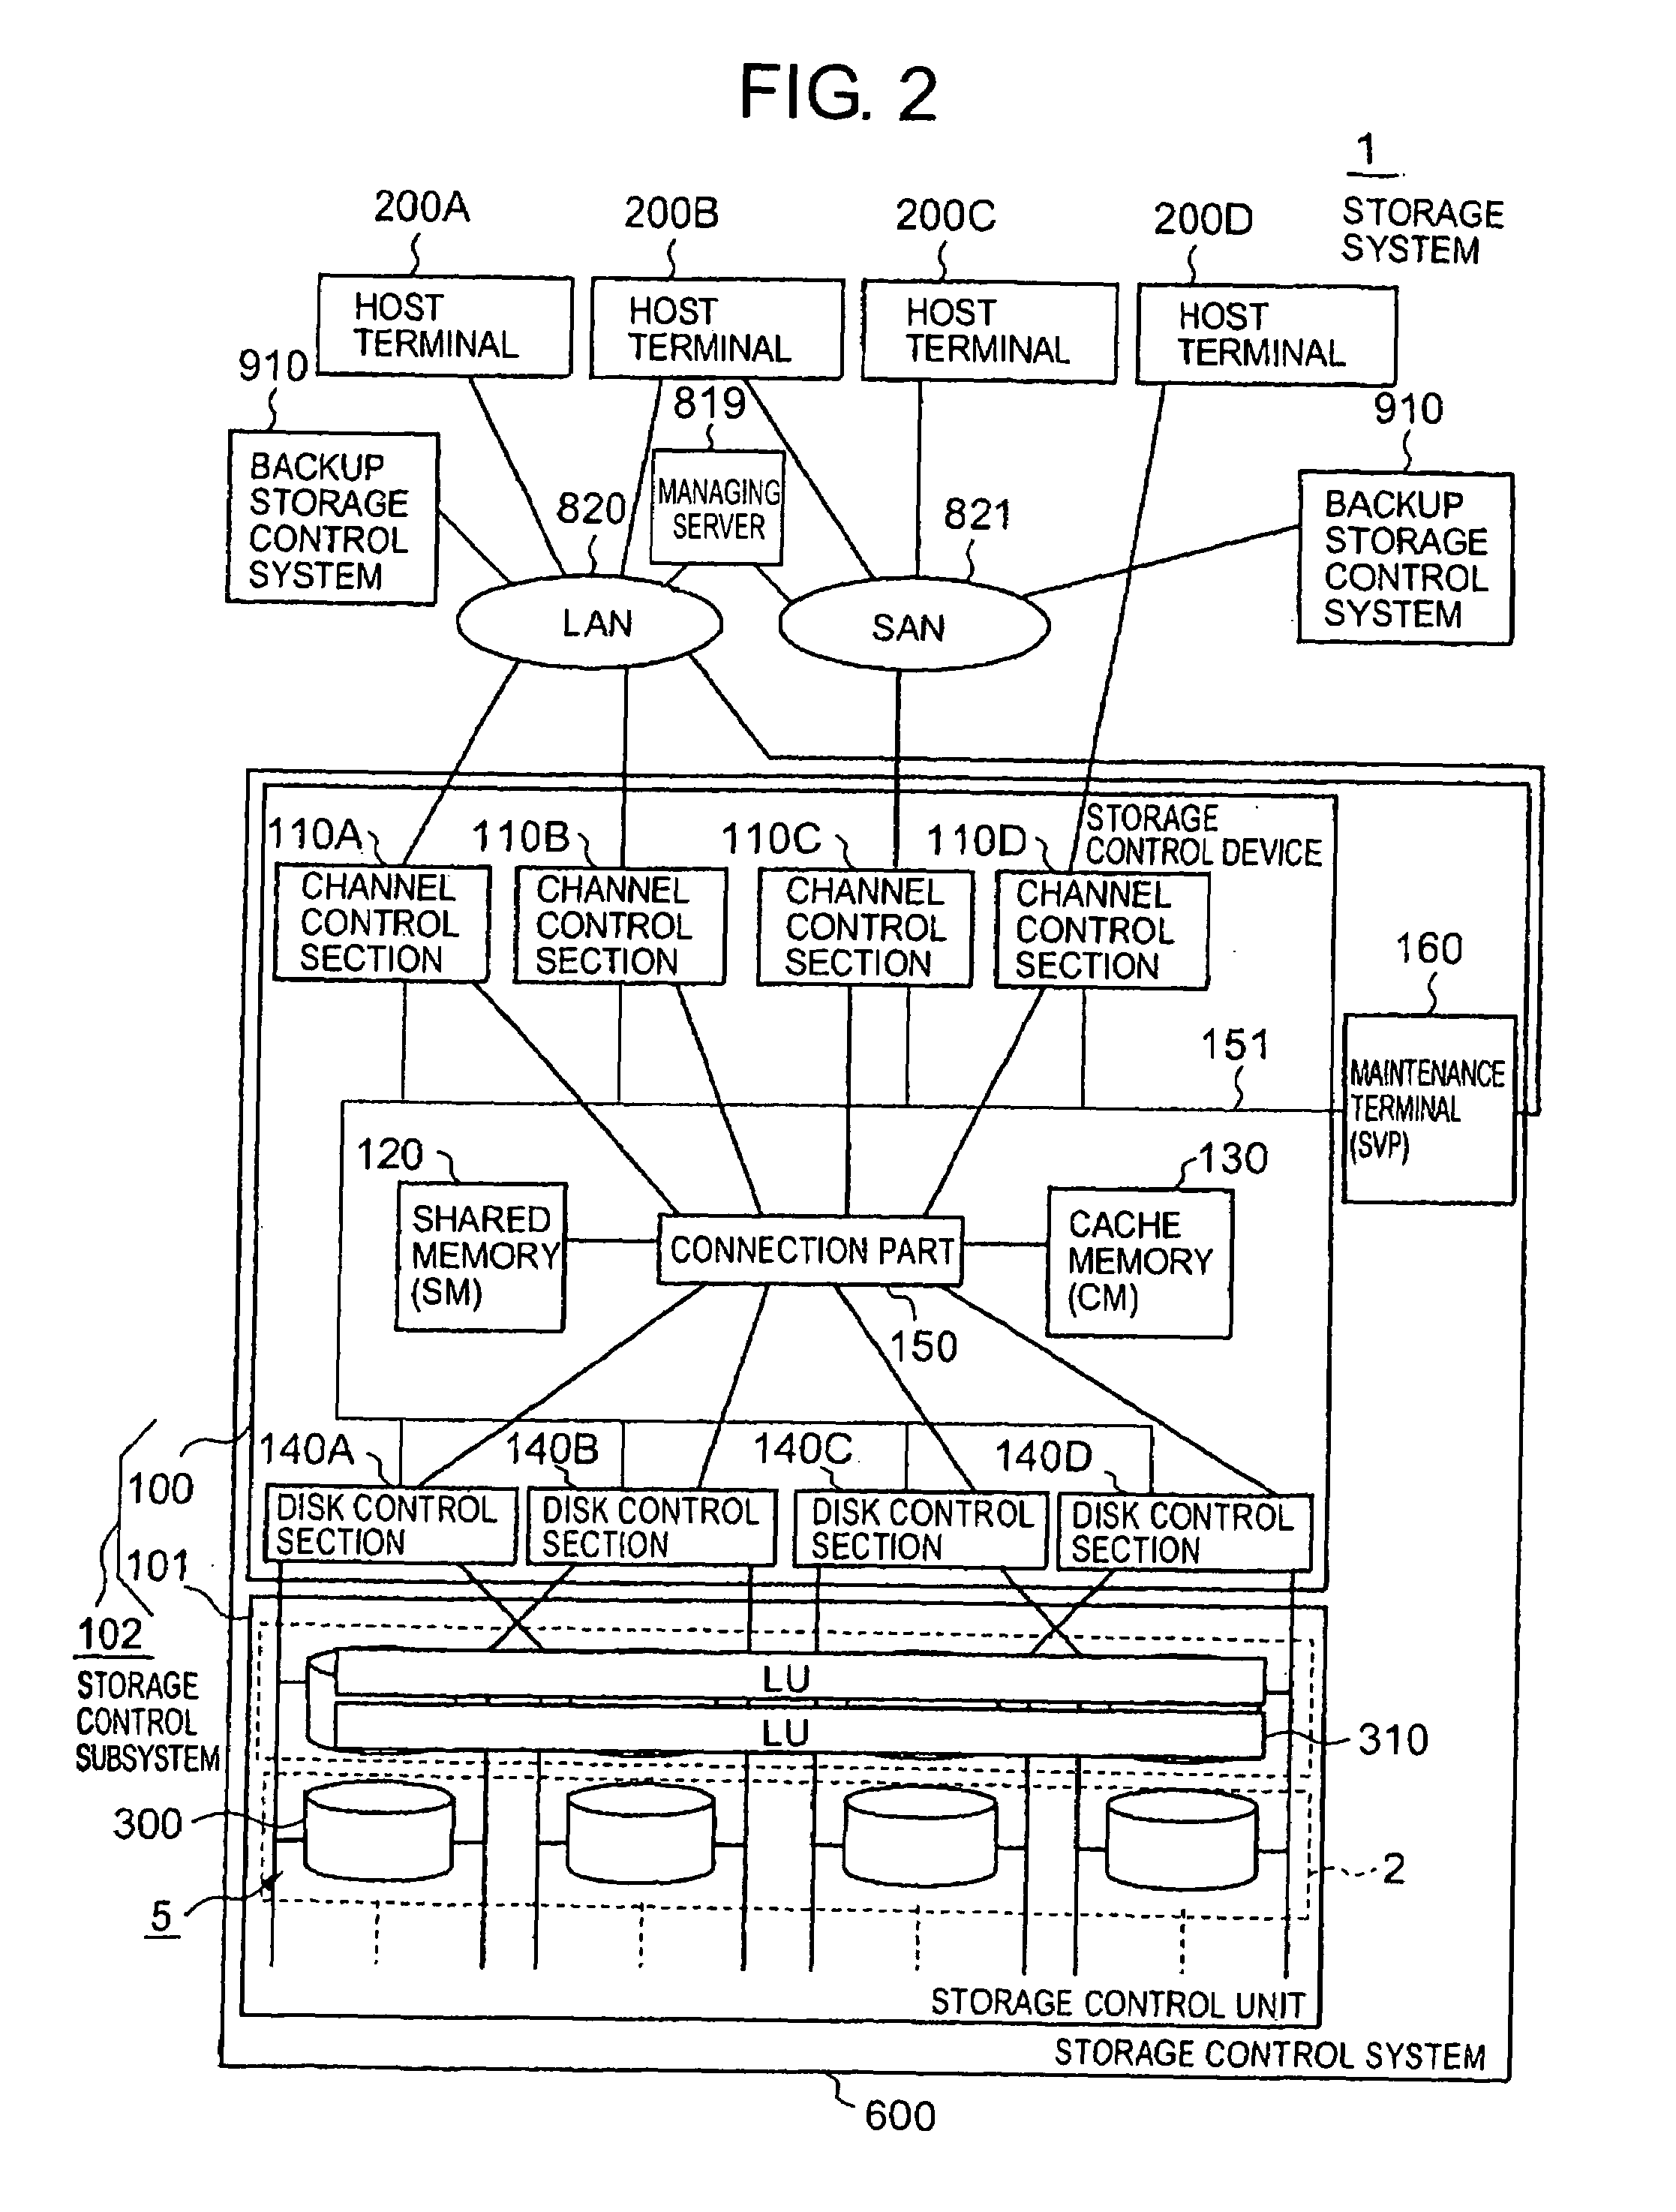 Efficient update of firmware in a disk-type storage device